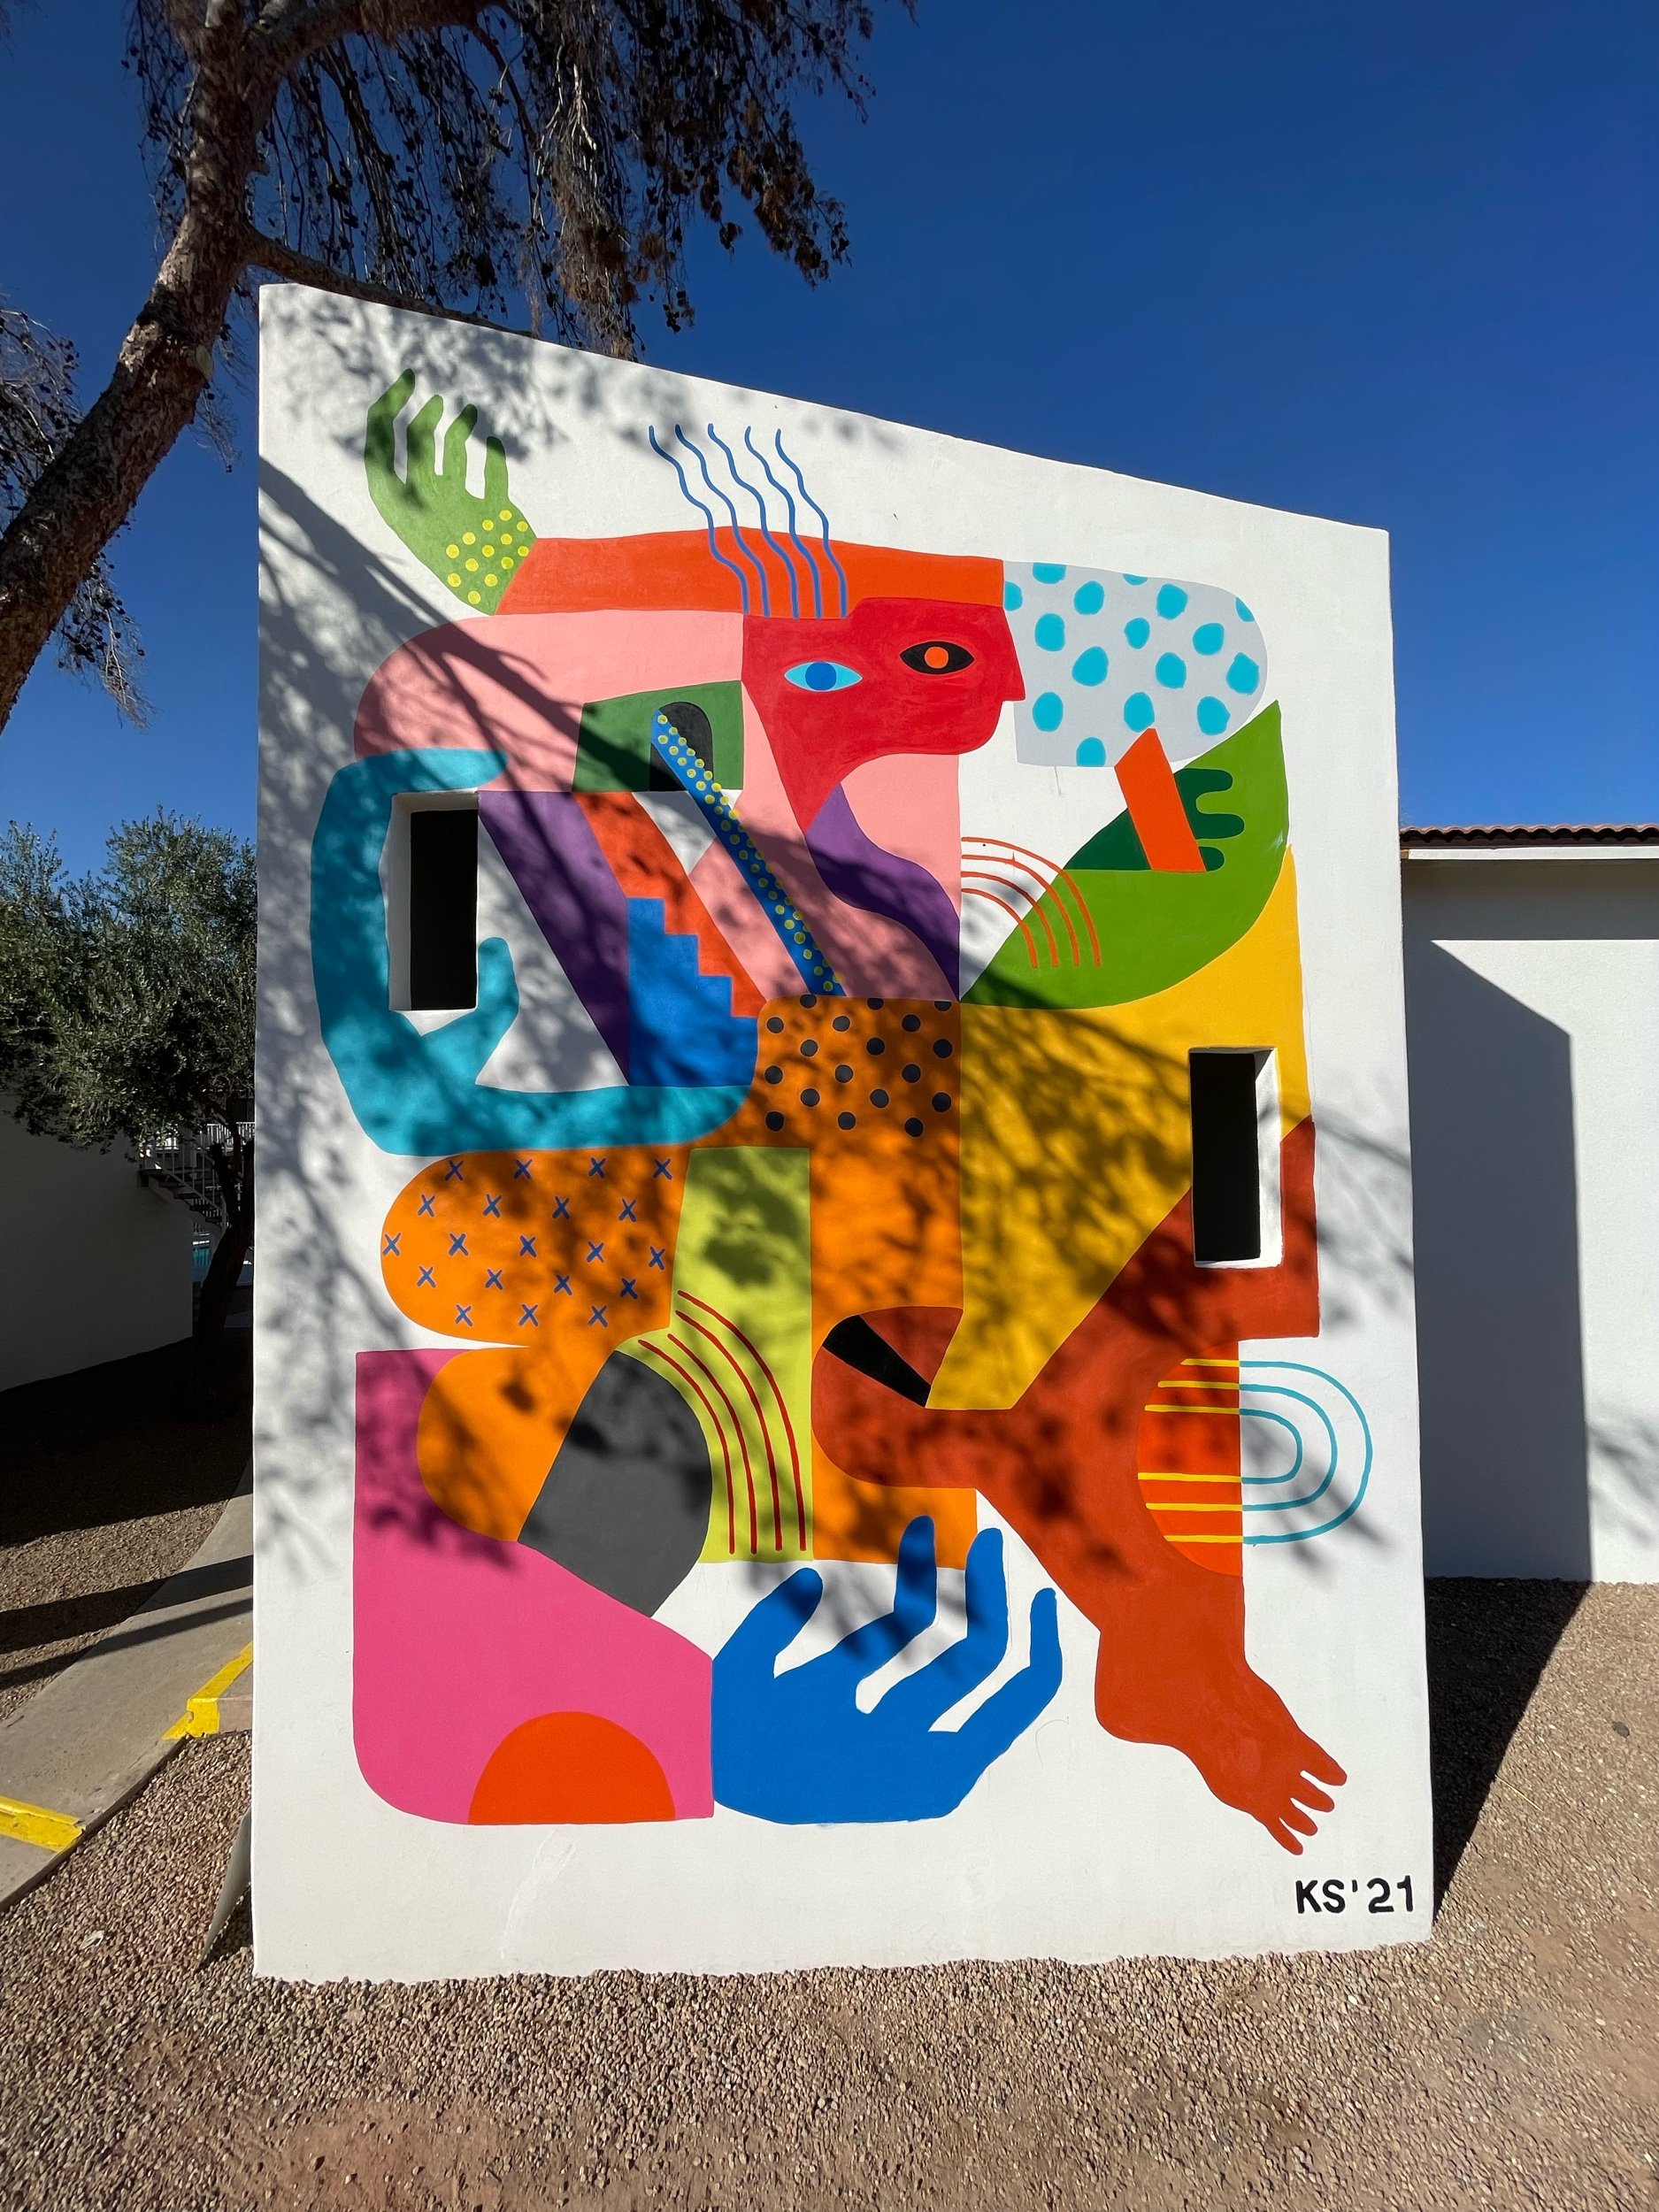 Mural by Kyle Steed for Polanco property in Scottsdale, AZ